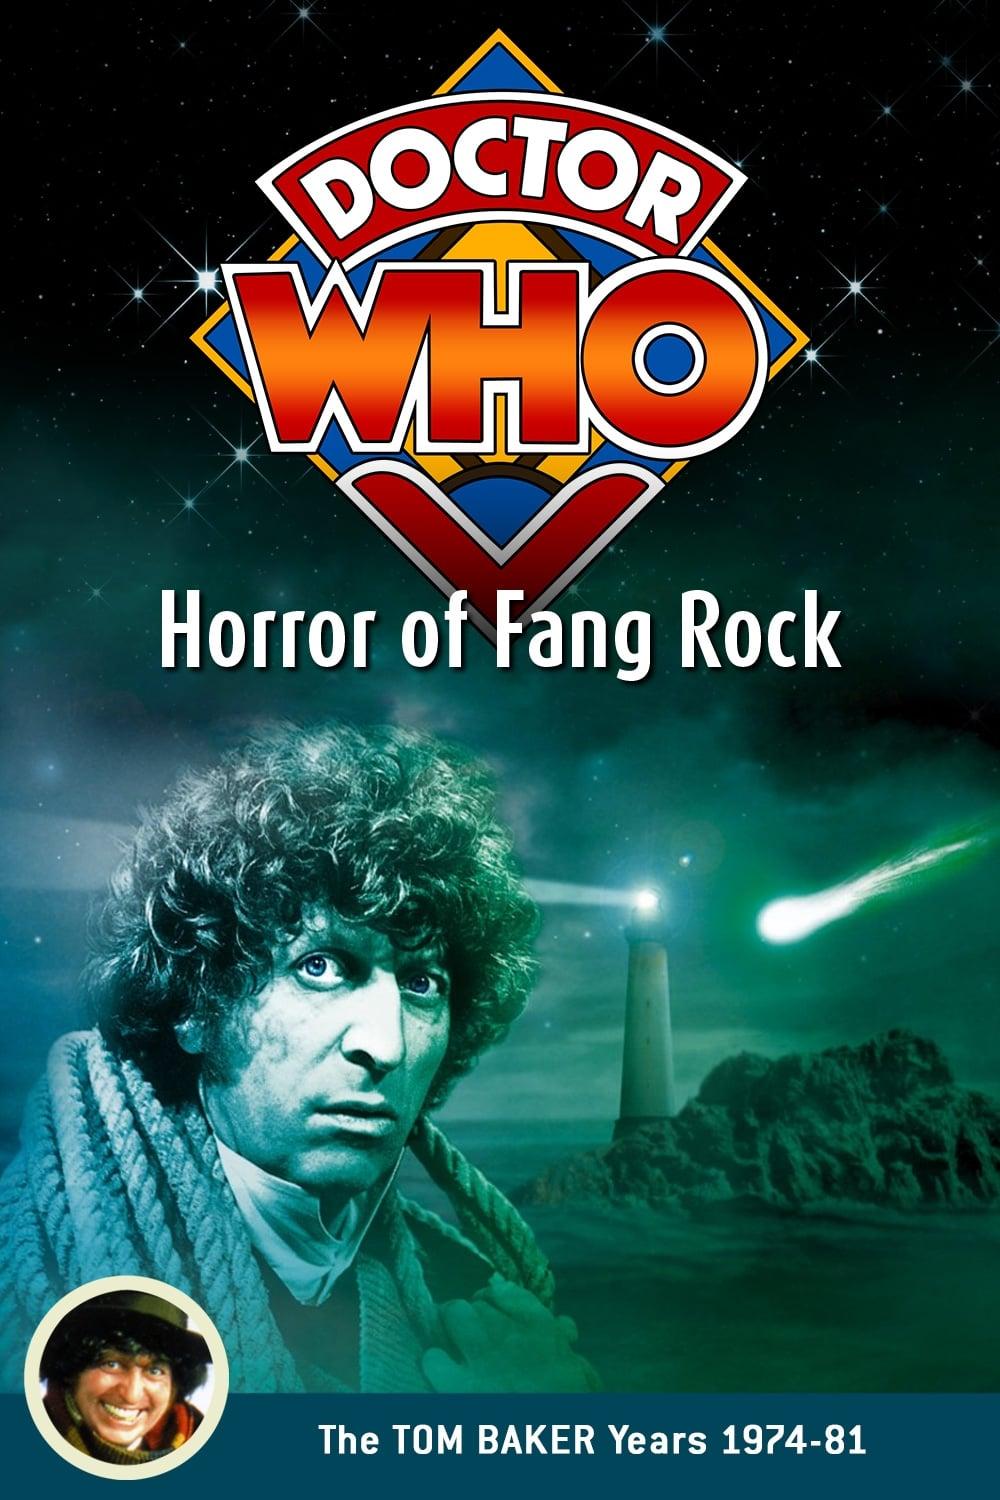 Doctor Who: Horror of Fang Rock poster